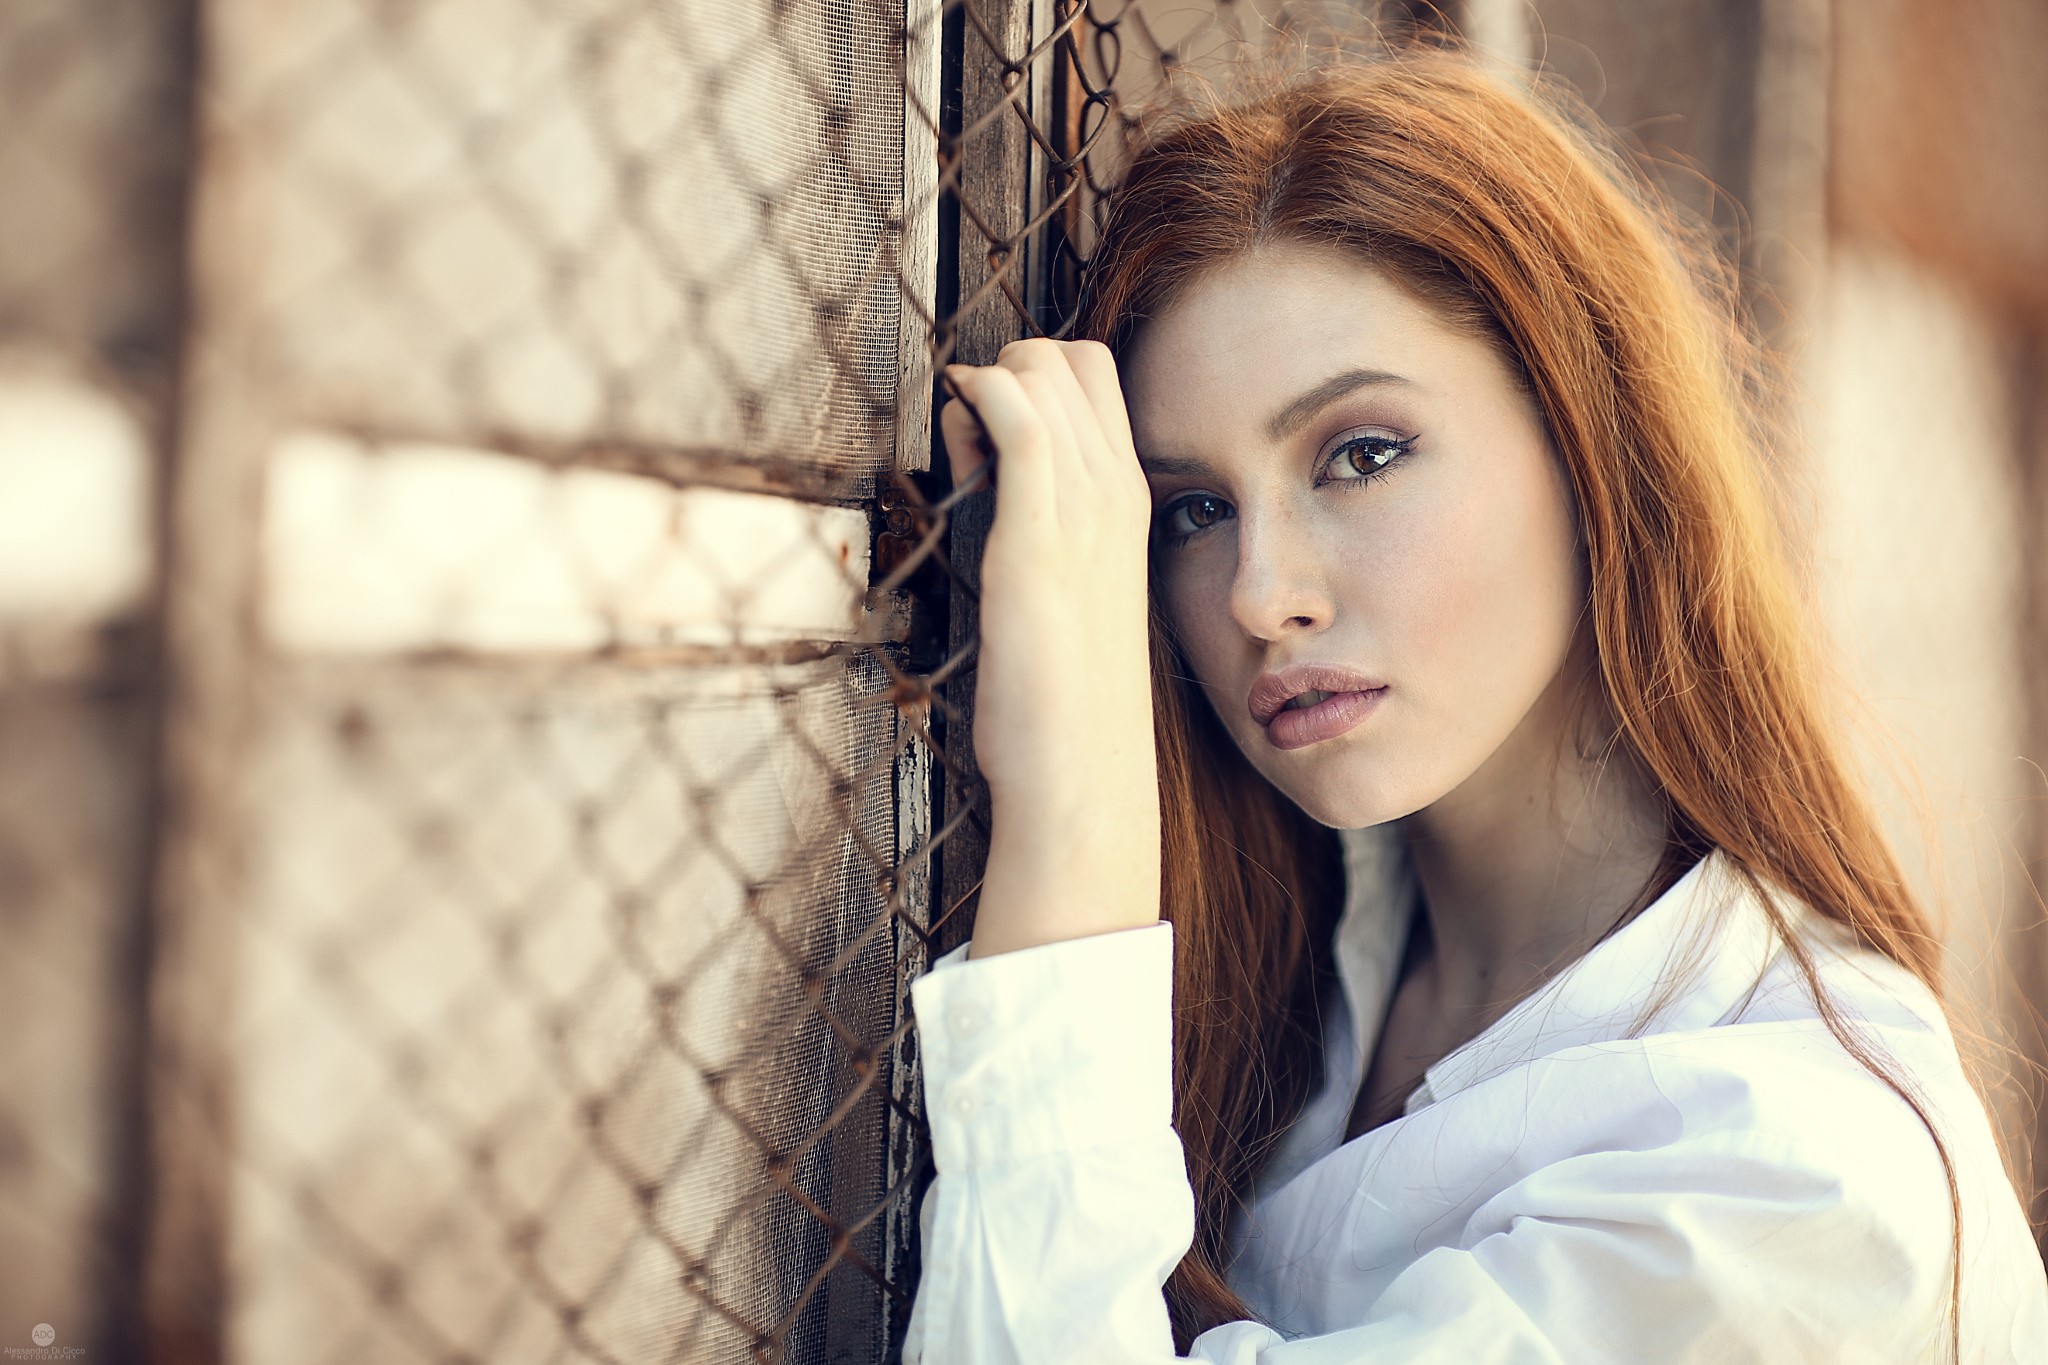 People 2048x1365 women model redhead brown eyes juicy lips portrait depth of field Alessandro Di Cicco Valentina Galassi women outdoors fence metal grid parted lips pale closeup watermarked